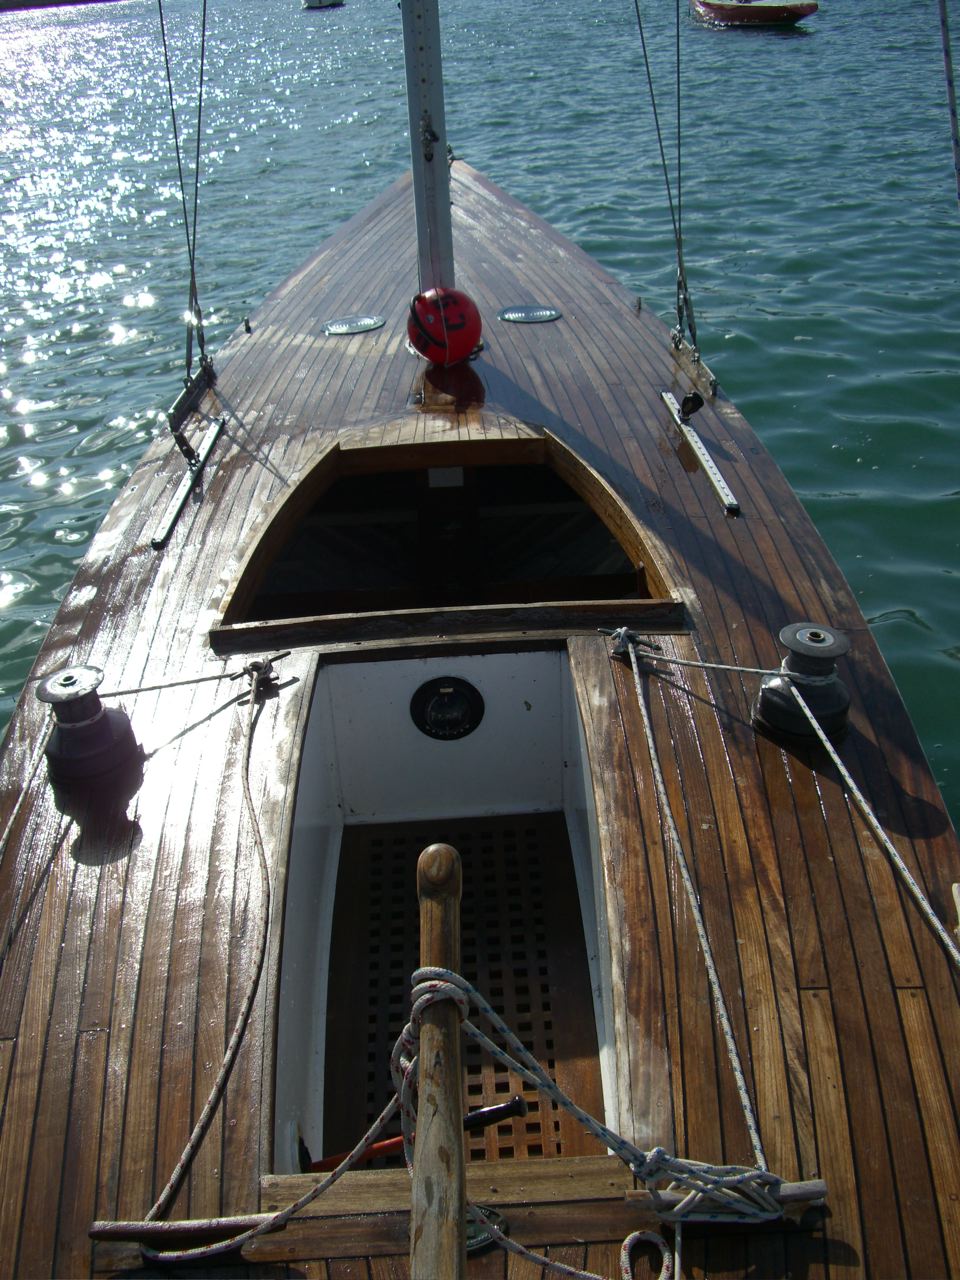 Bow section and cockpit of a yacht deck, moored in blue water